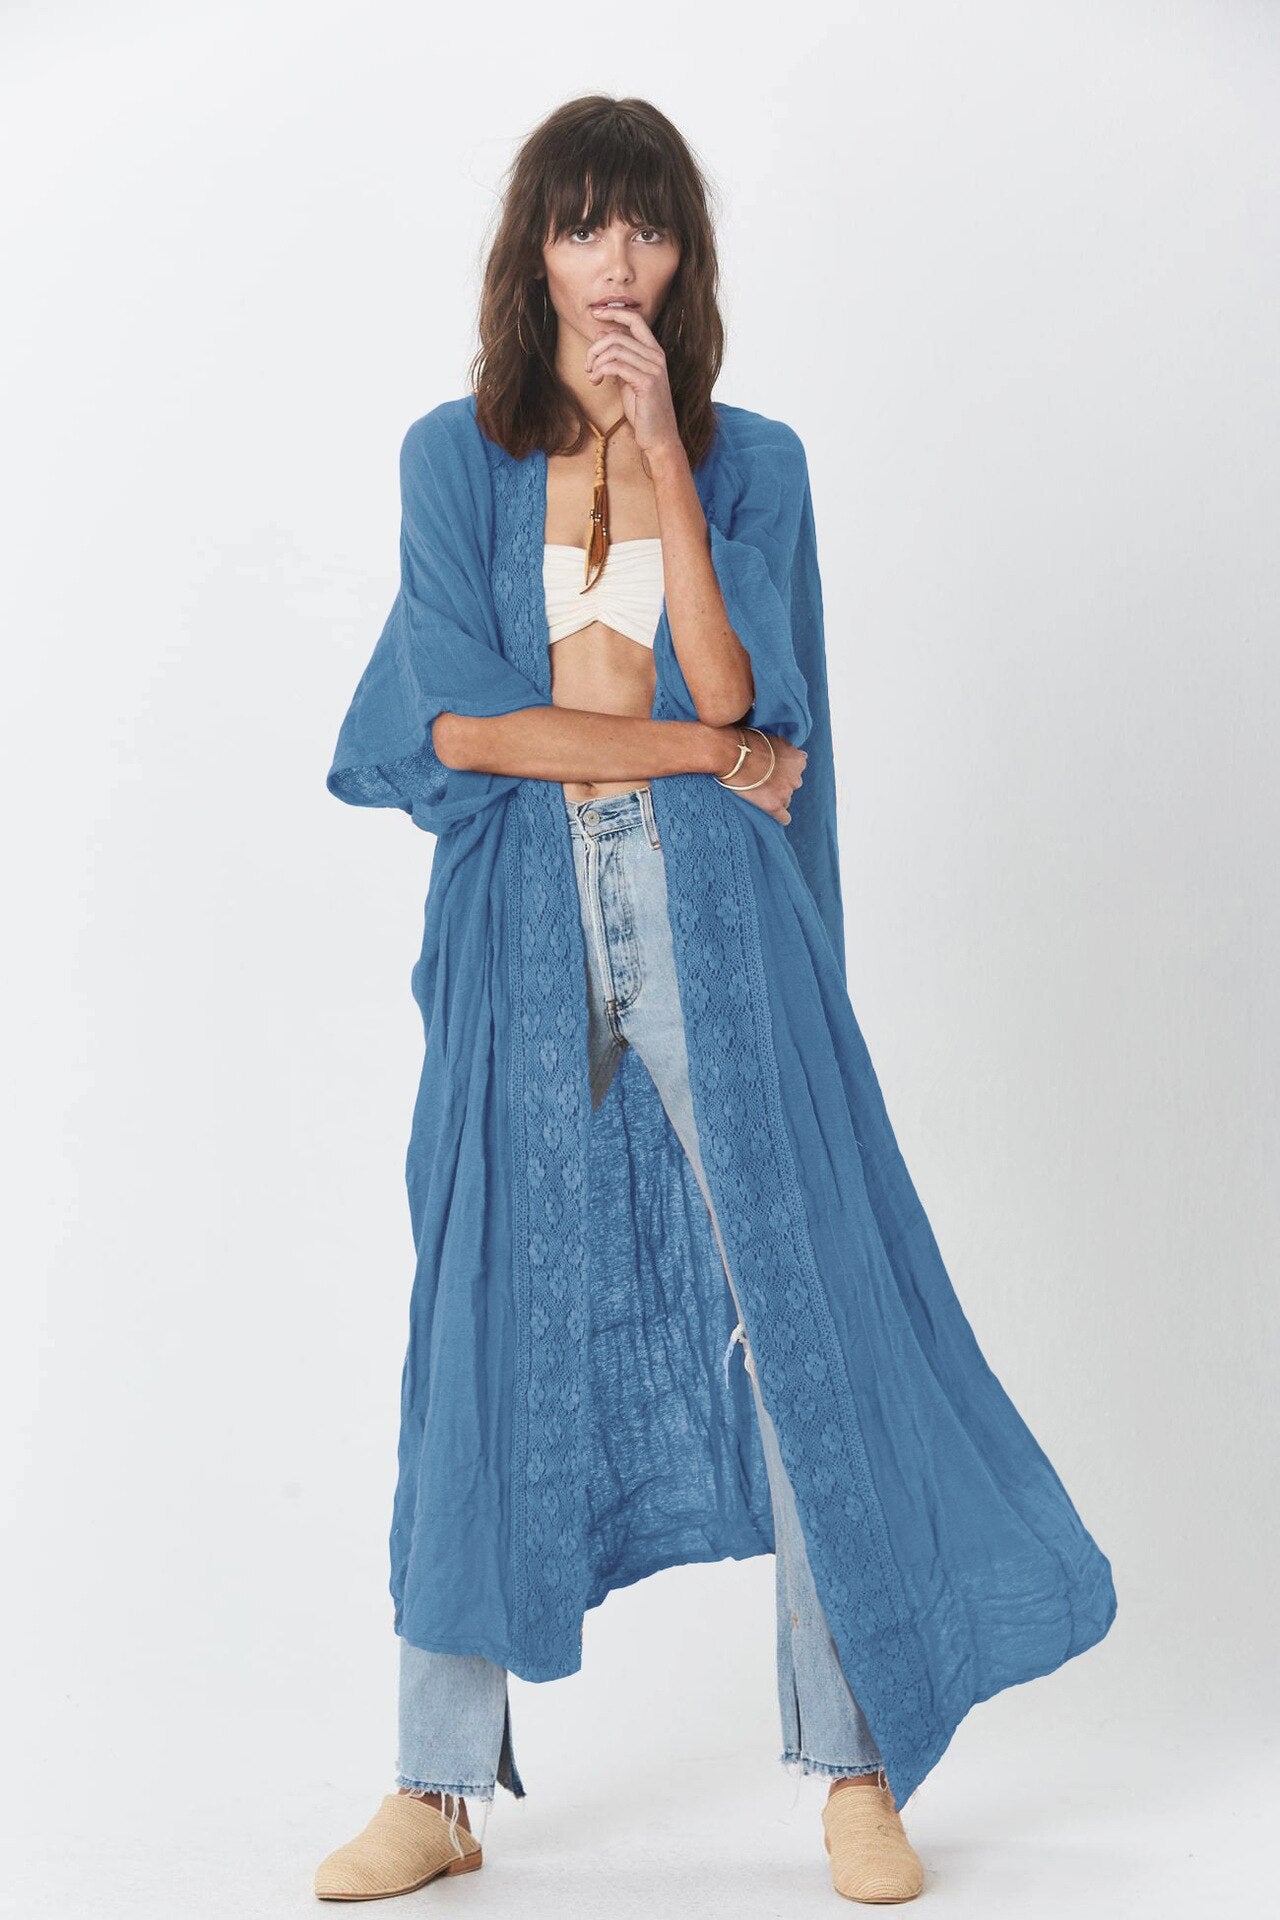 Solid Cover-ups Sexy Deep Summer Beach Dress Lace Tunic Women Beachwear Swimsuit Cover Up Robe de plage Q1263